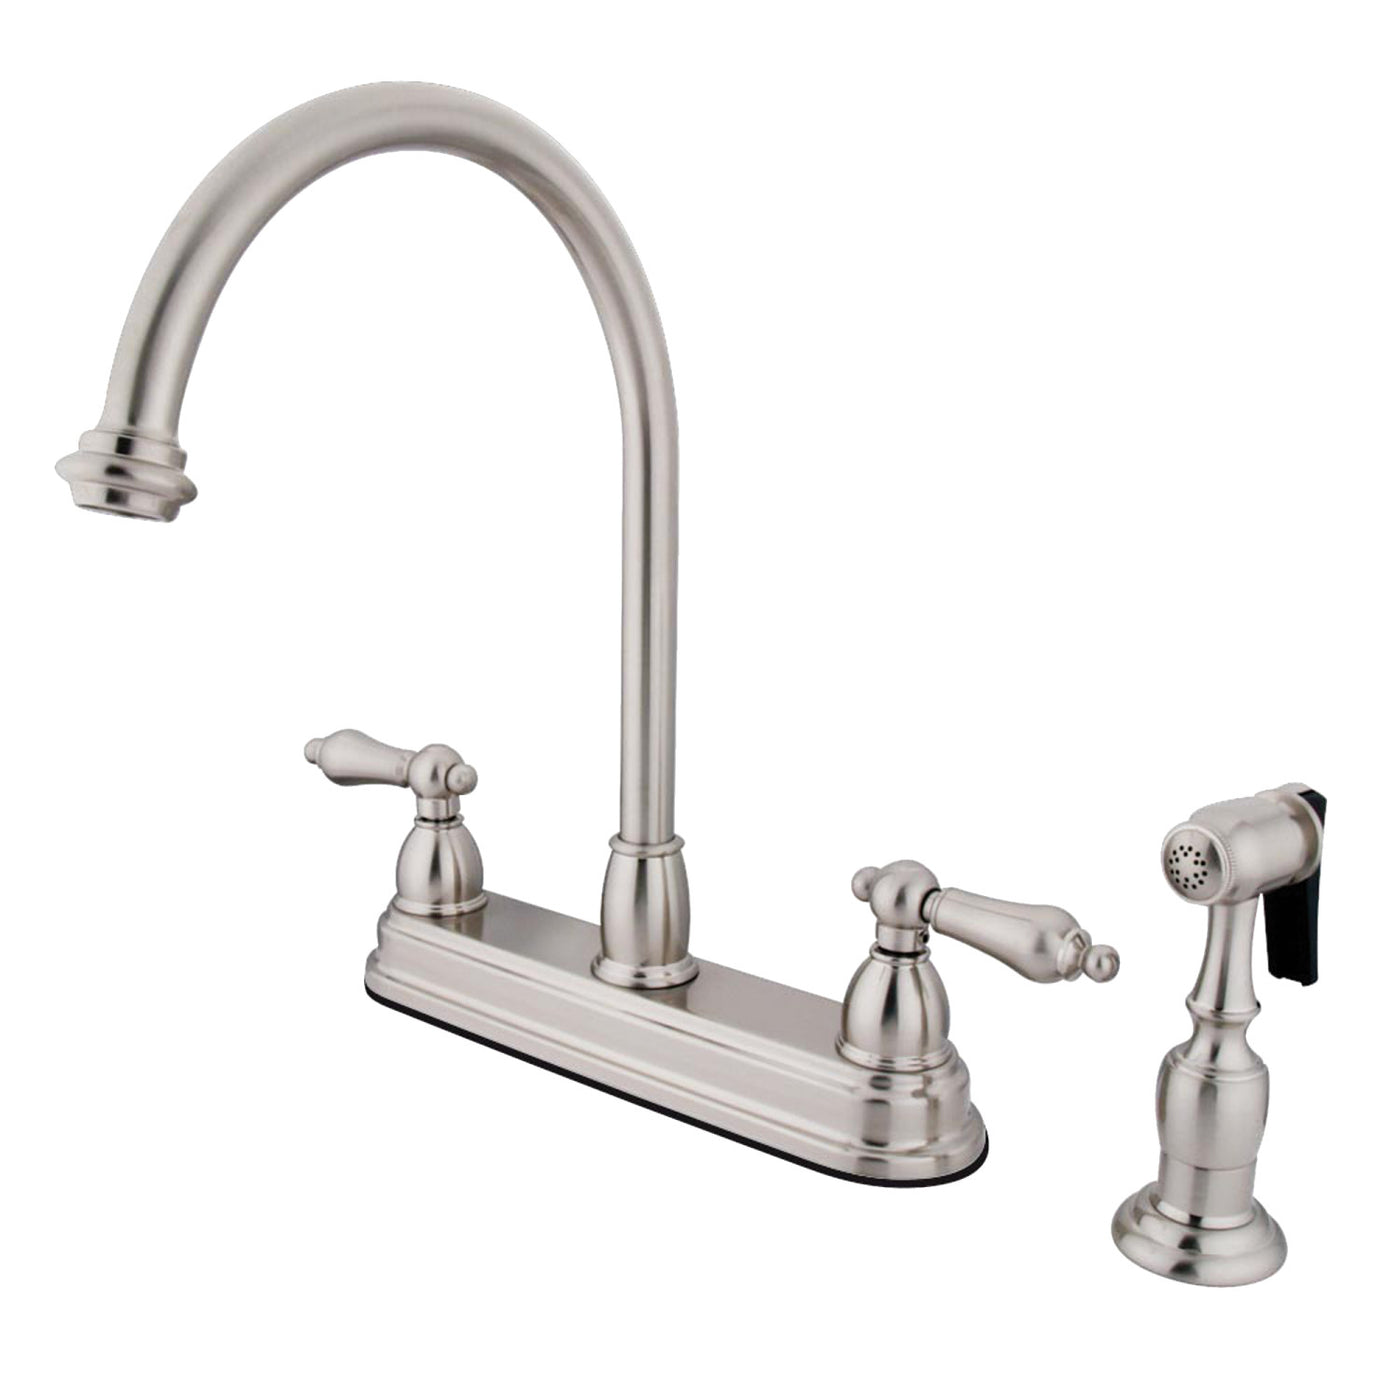 Elements of Design EB3758ALBS 8-Inch Centerset Kitchen Faucet, Brushed Nickel